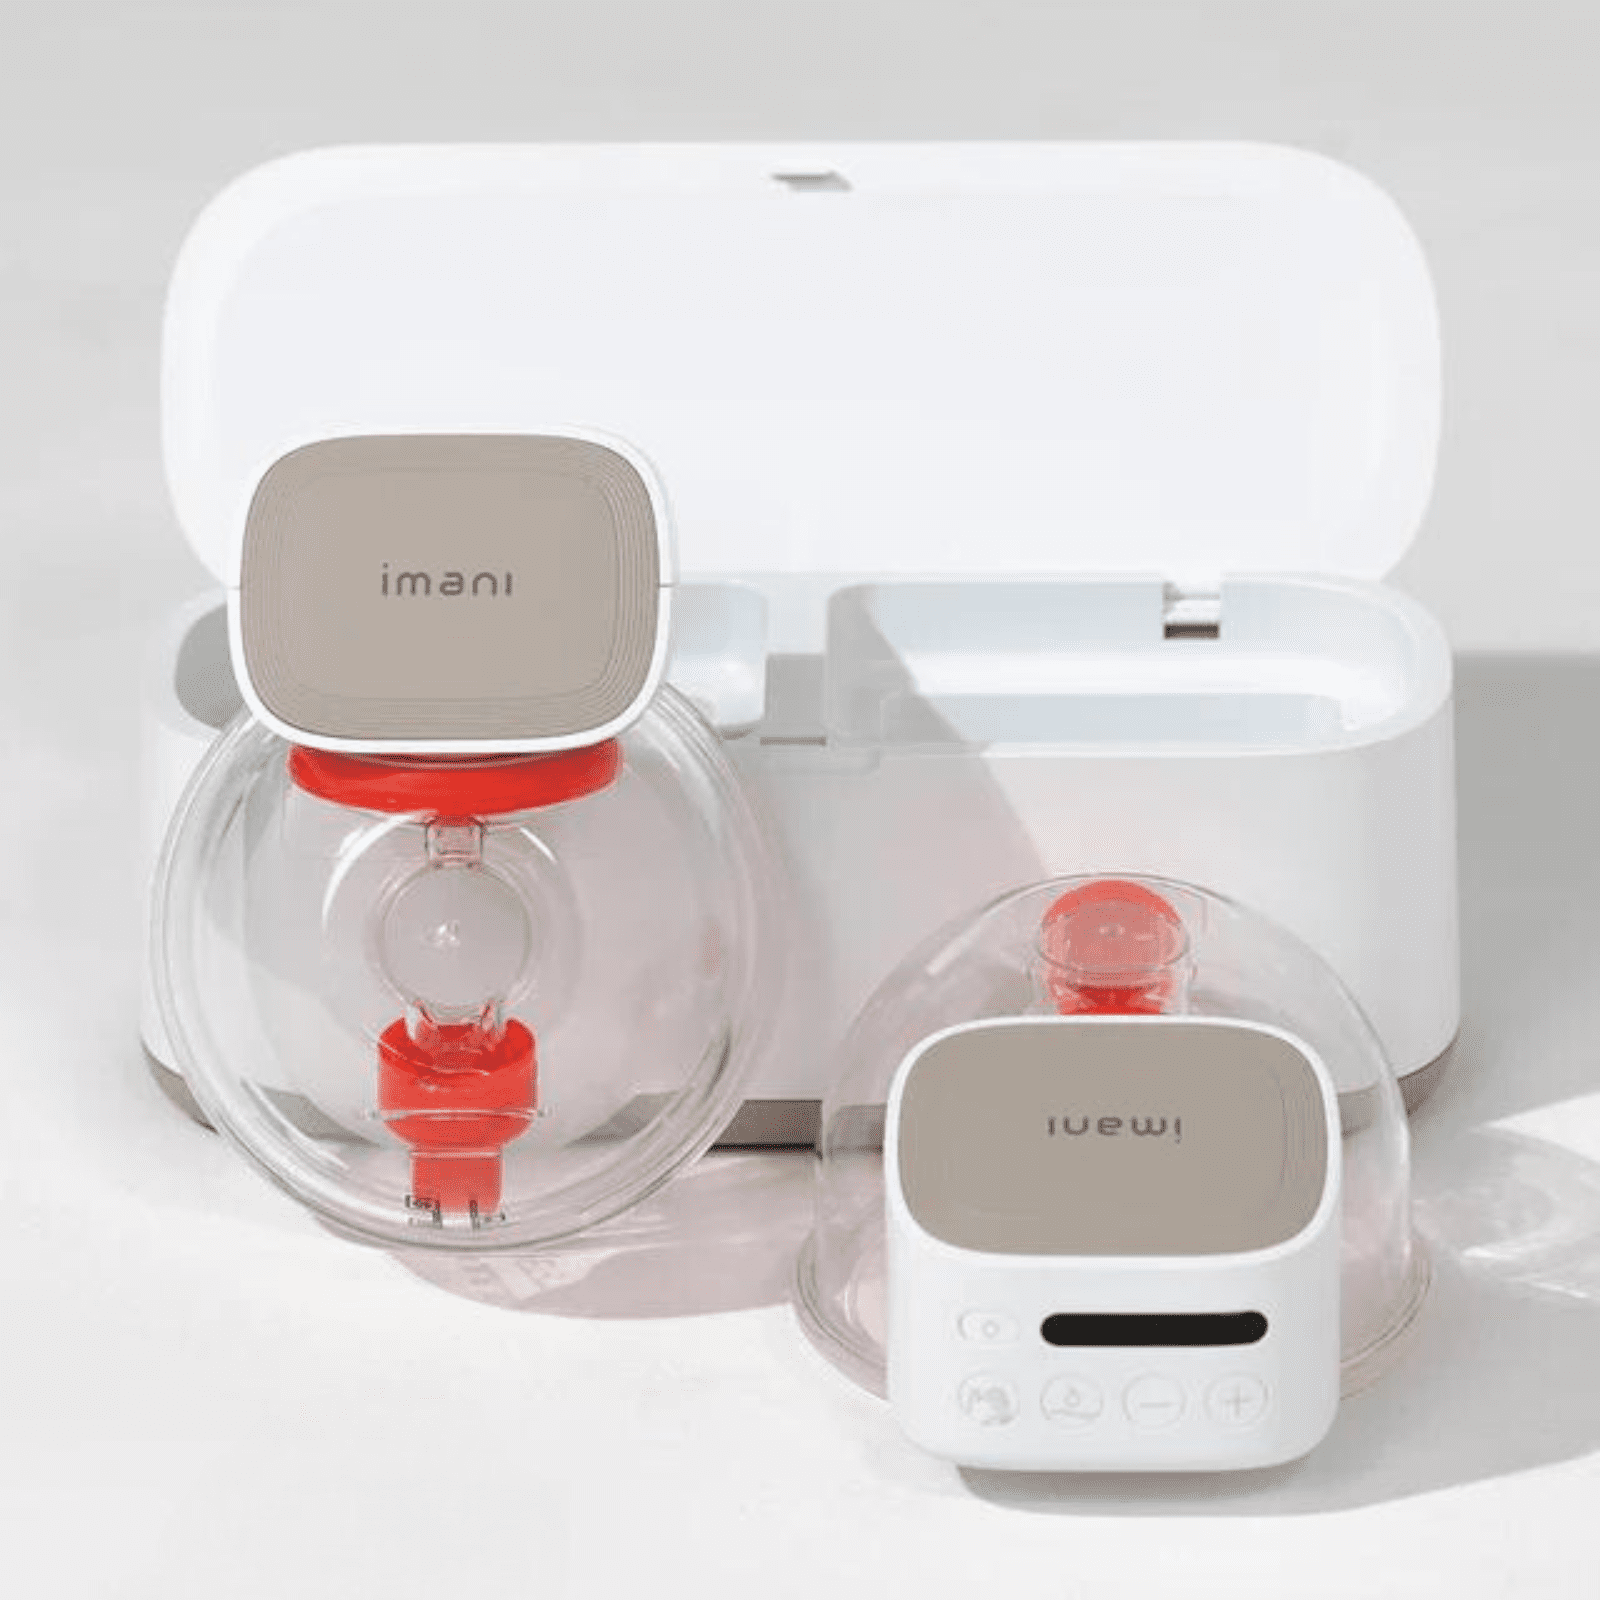 imani i2 plus wearable breast pump with dual charging dock through insurance